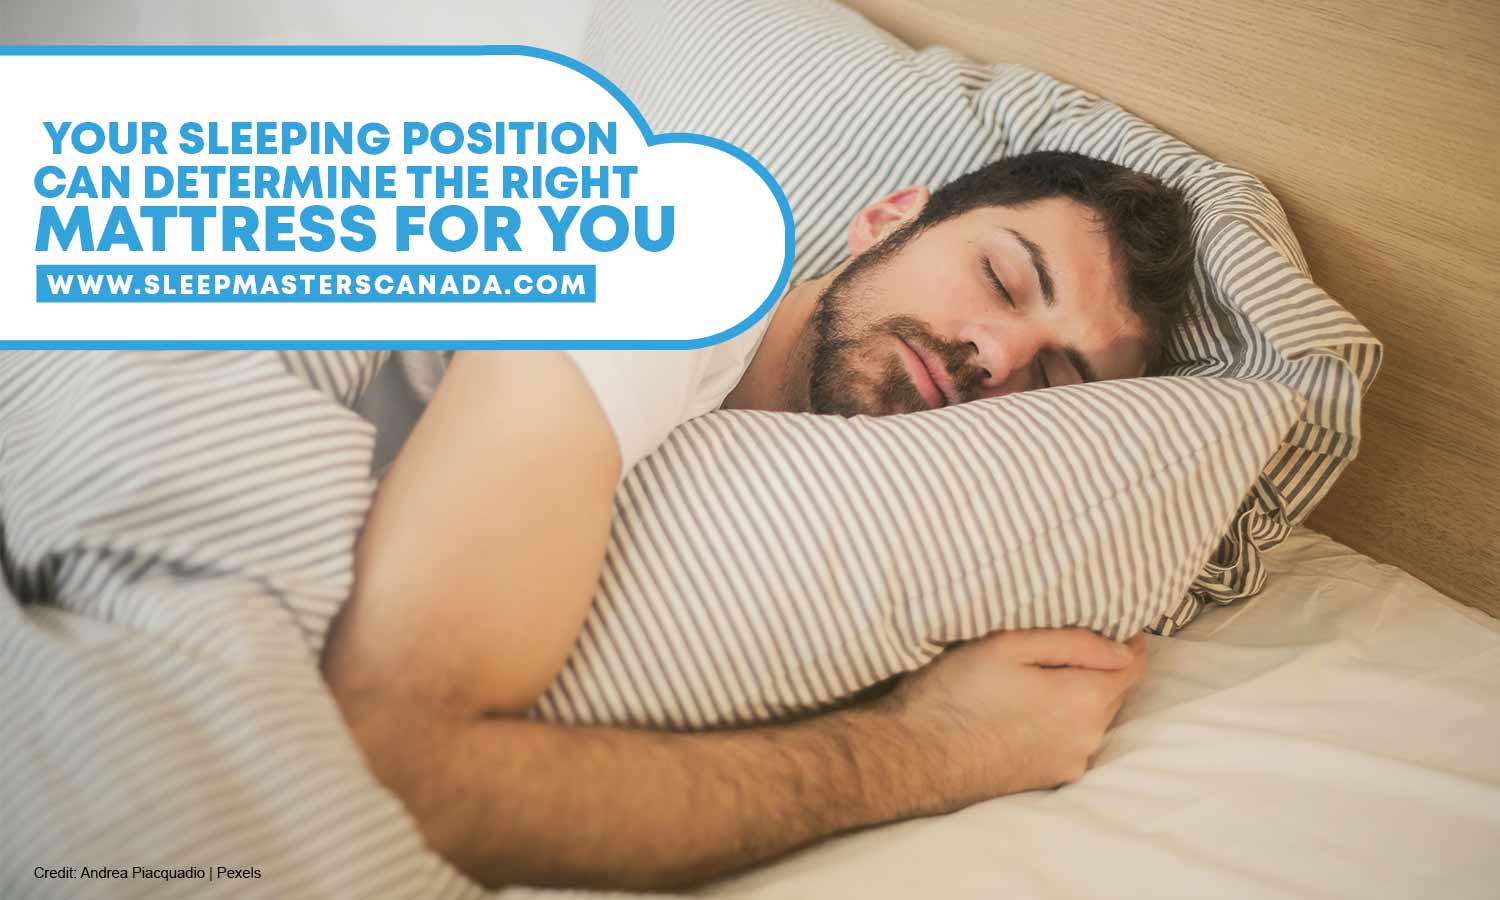 Your sleeping position can determine the right mattress for you